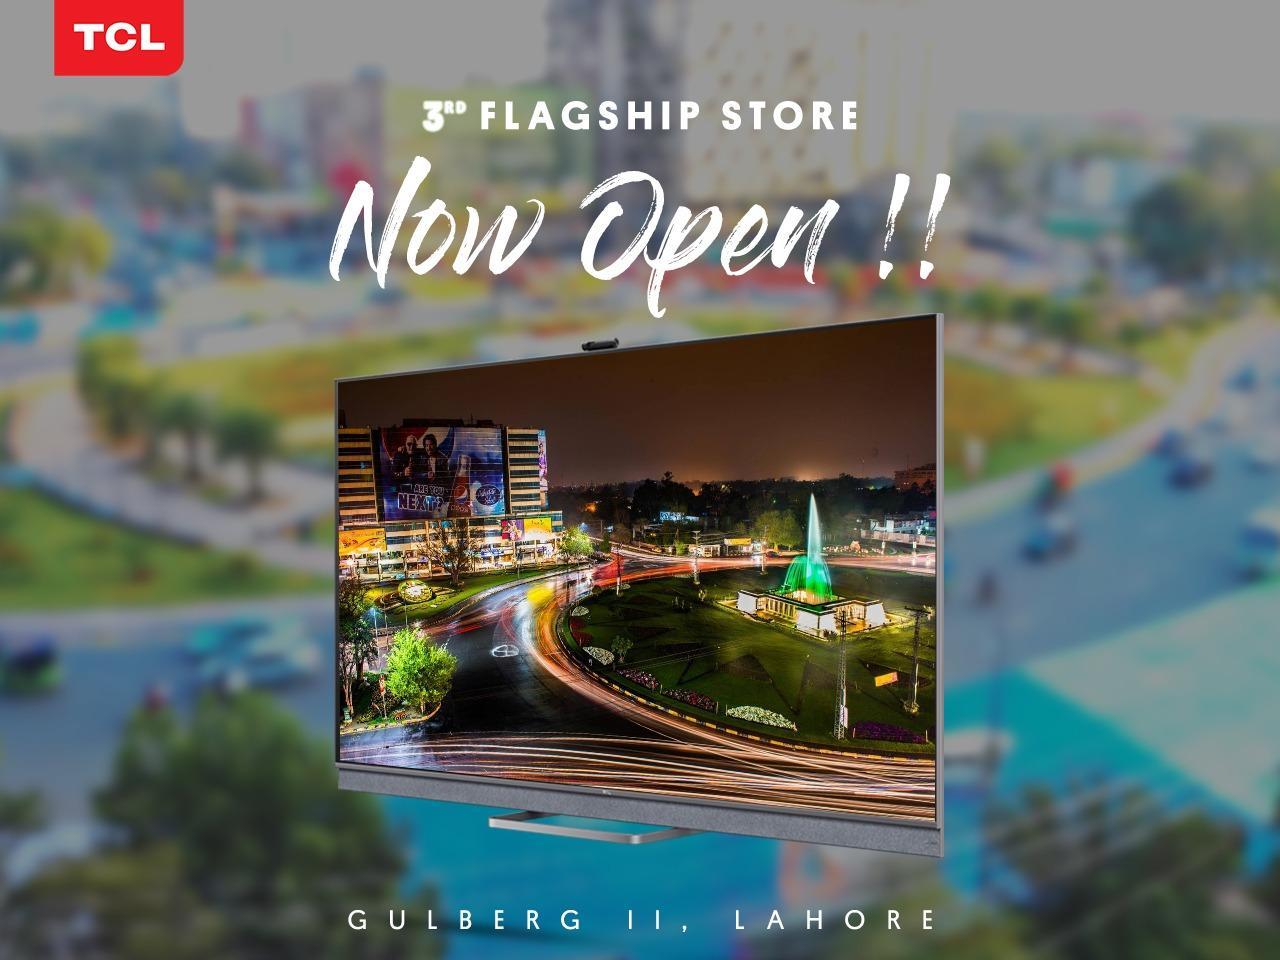 Pakistan’s No.1 LED TV — reached another milestone with the opening of its third flagship store in Lahore.